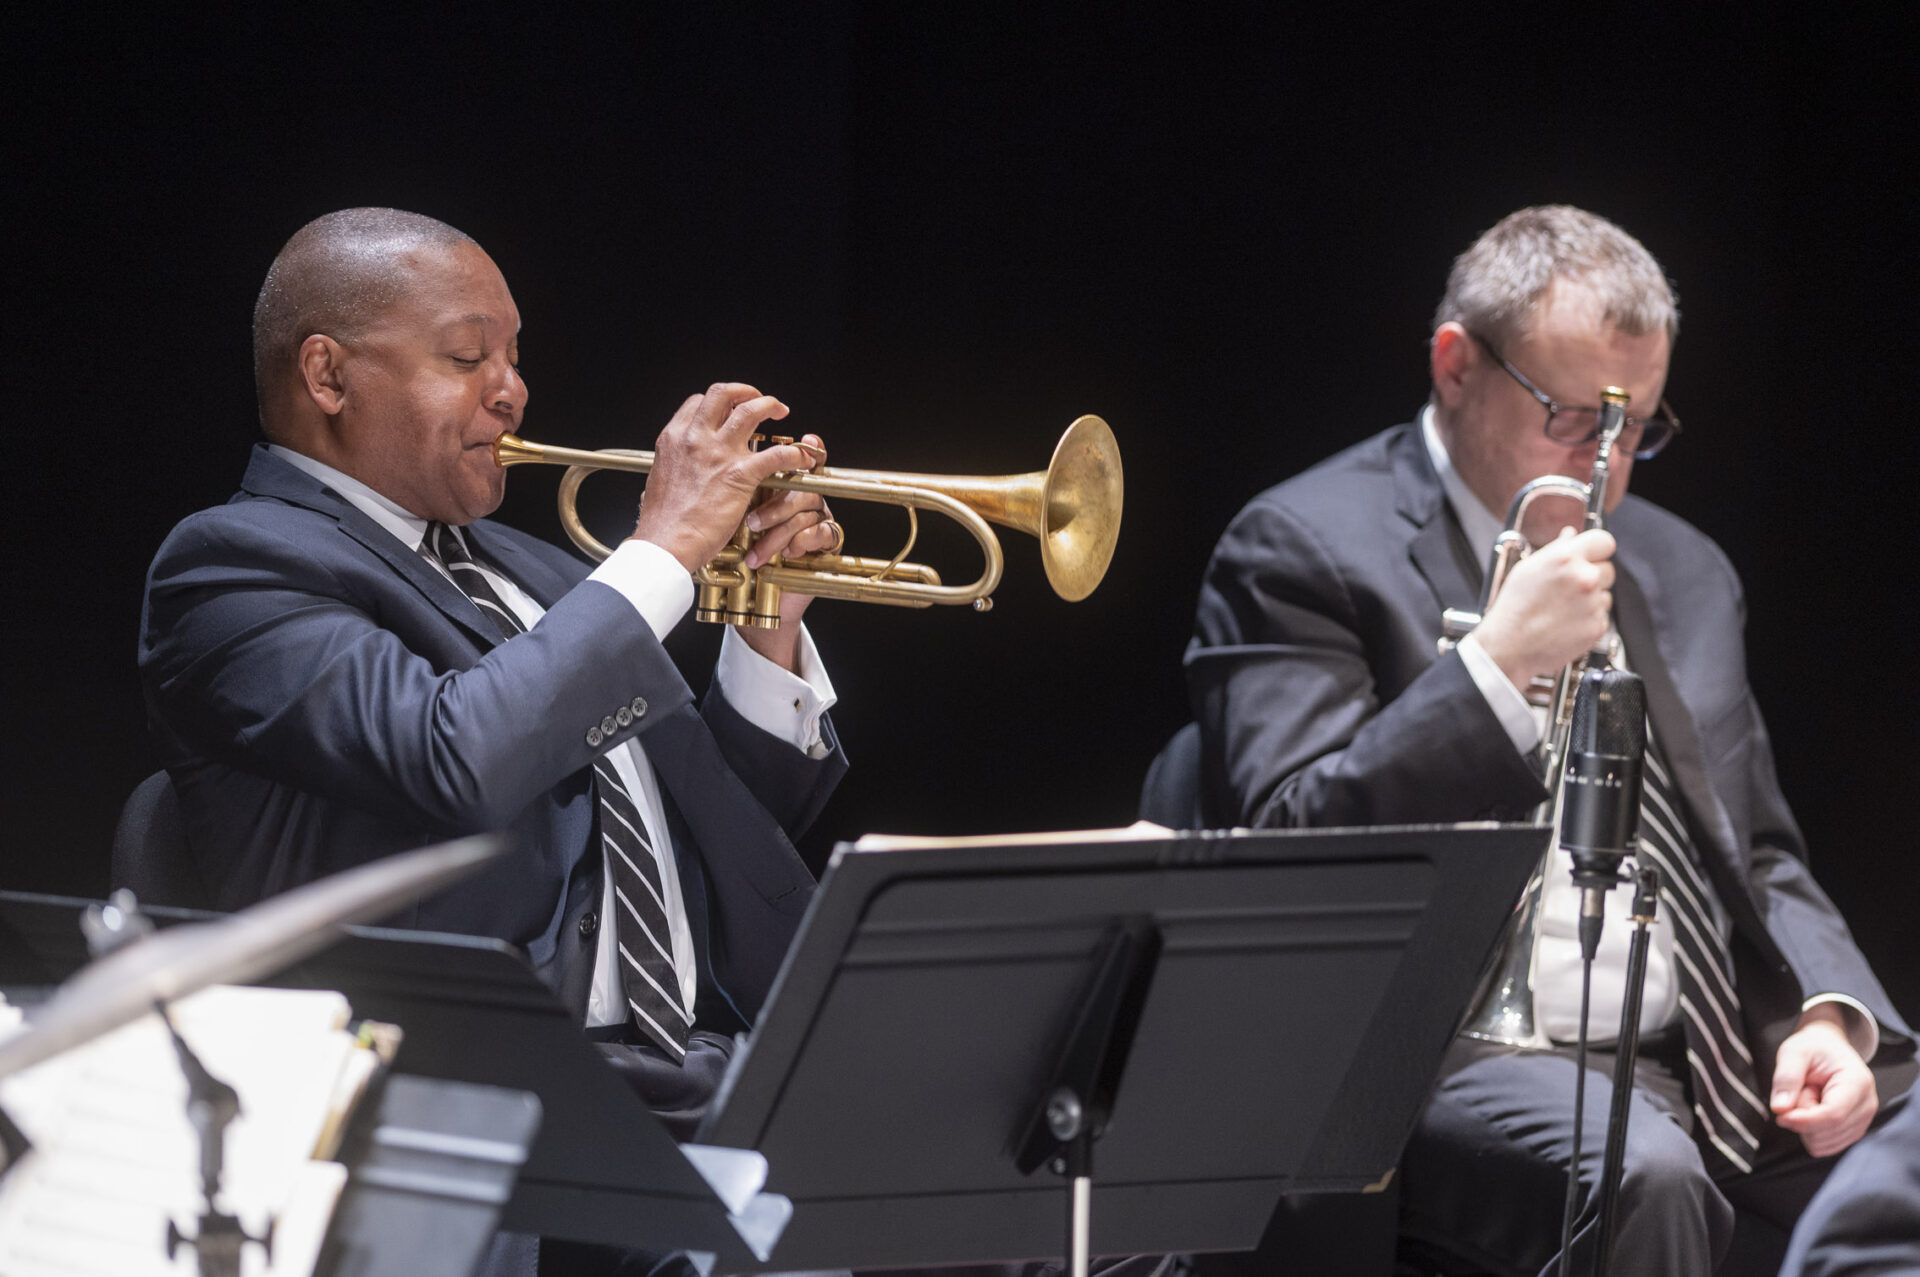 Wynton Marsalis & the Jazz at Lincoln Center Orchestra wins over the Canarian audience